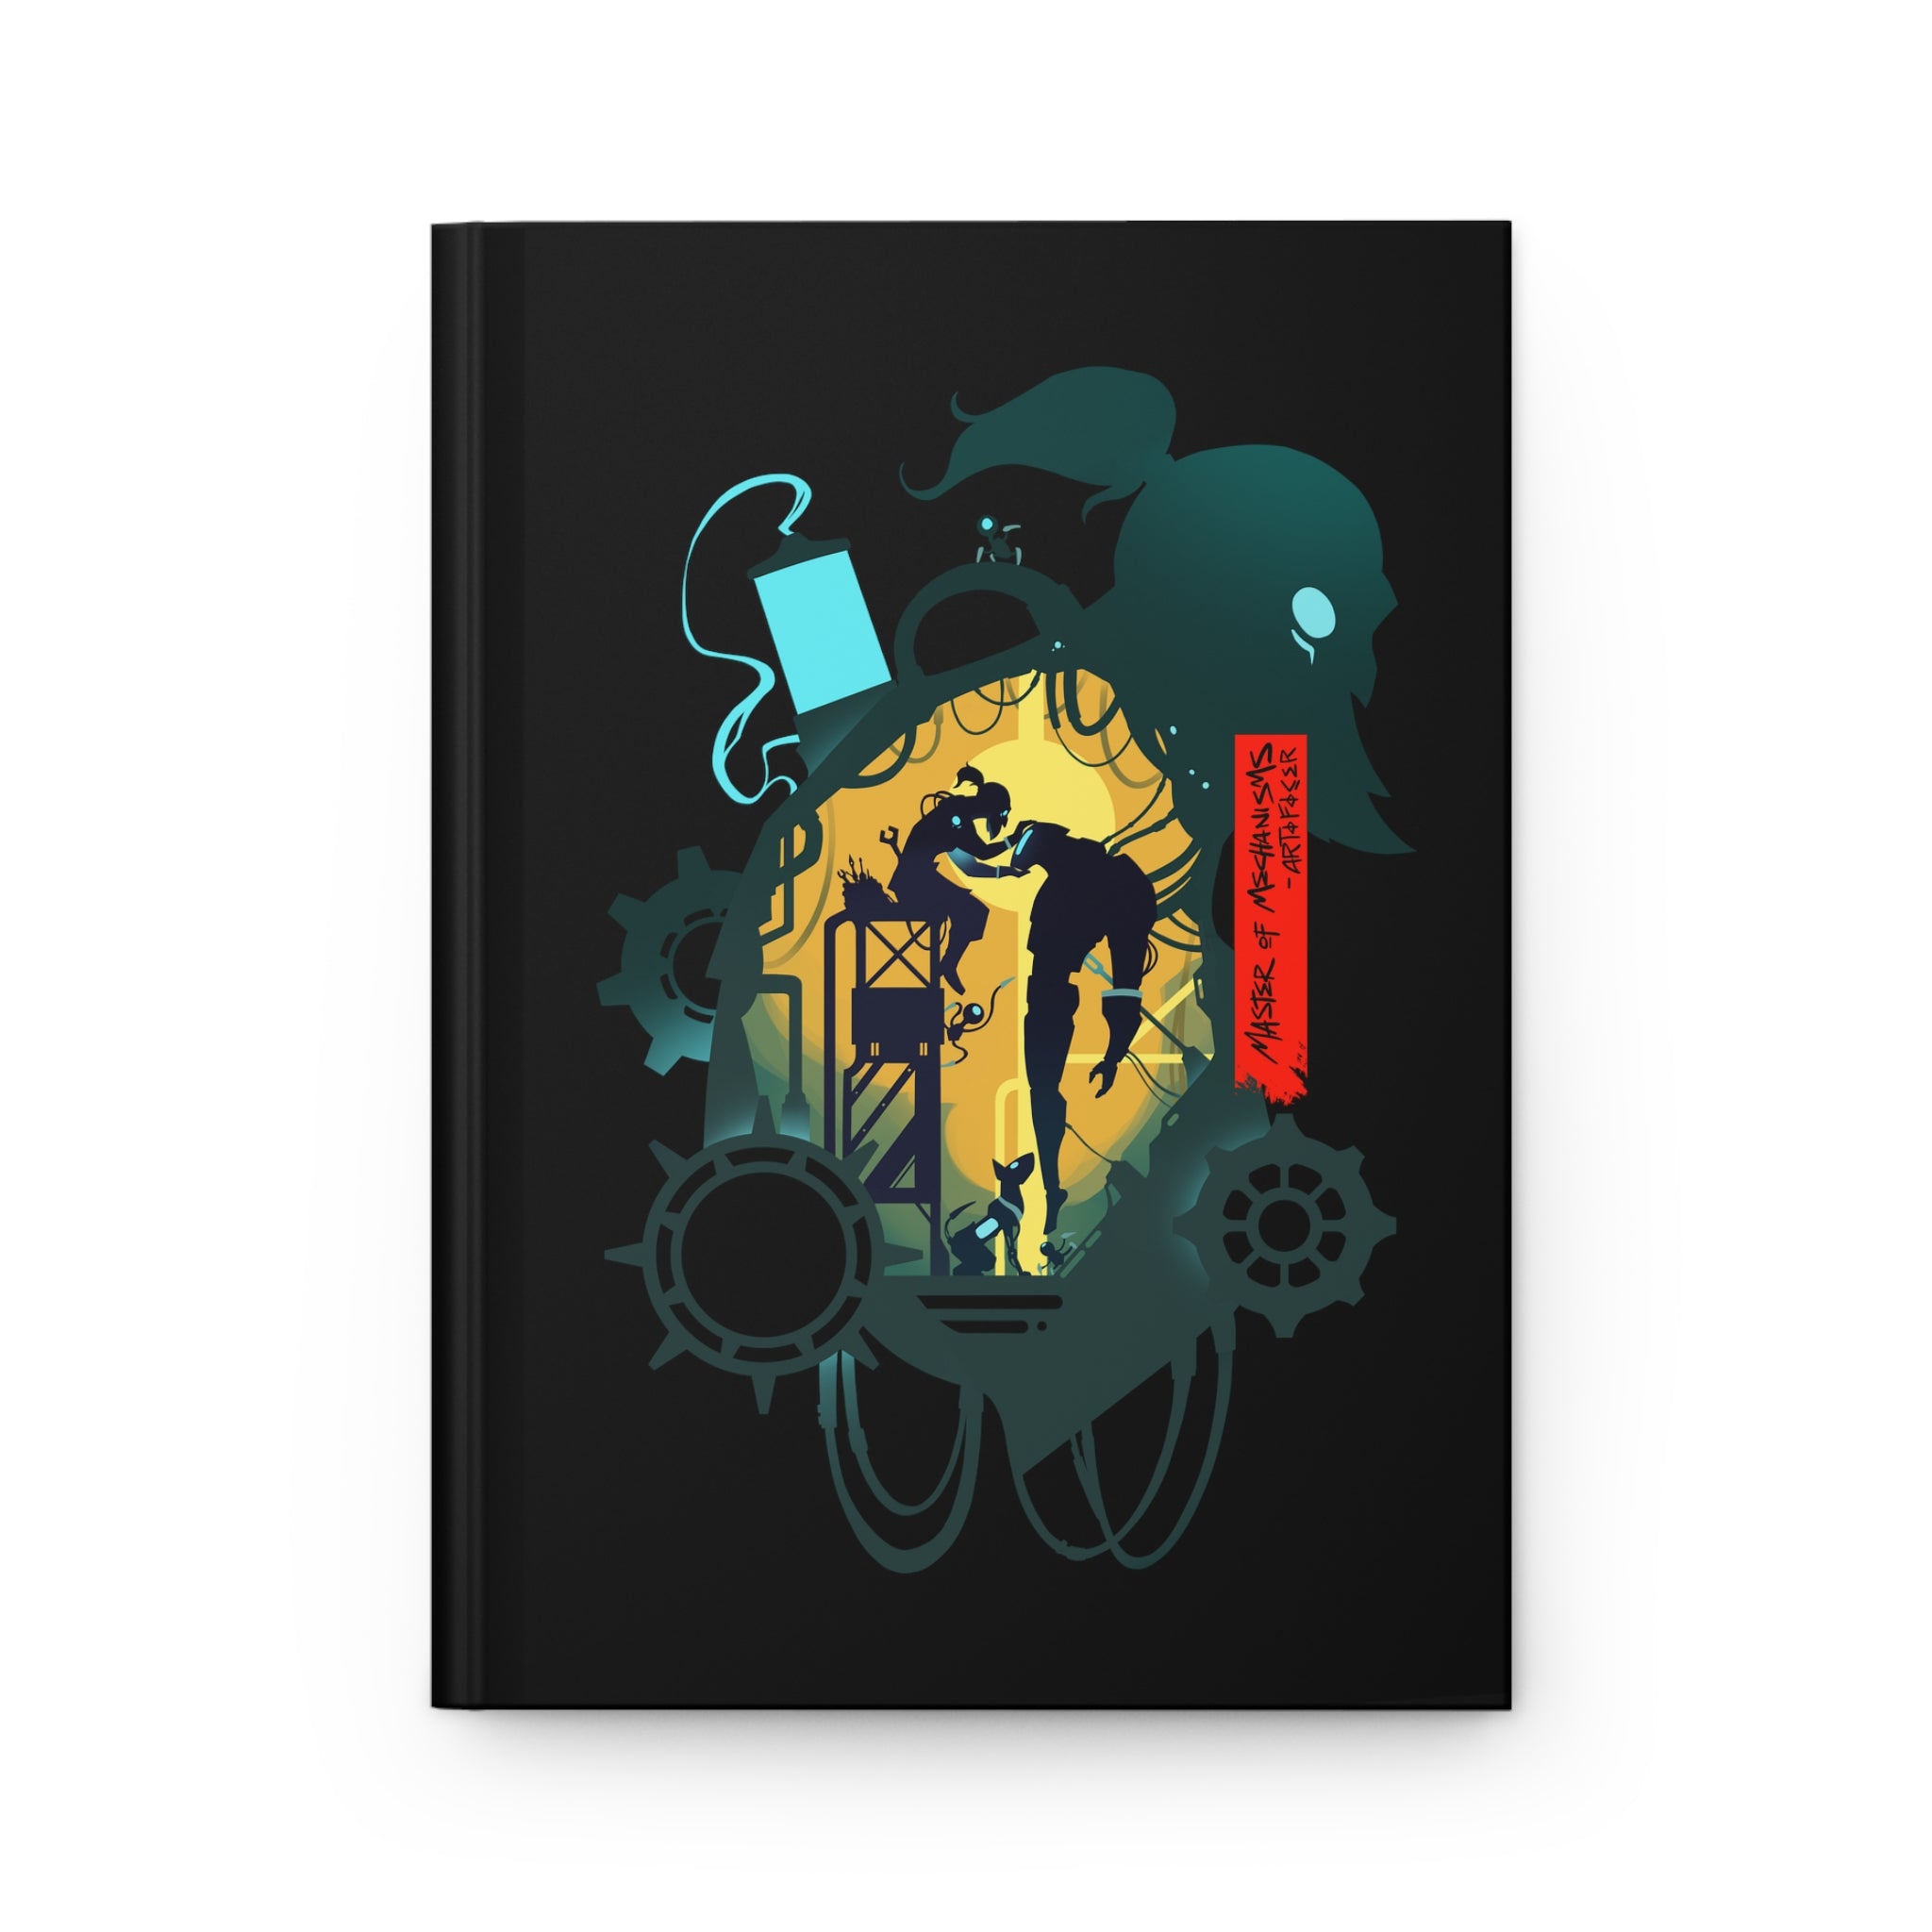 ARTIFICER CLASS SILHOUETTE HARDCOVER CAMPAIGN JOURNAL